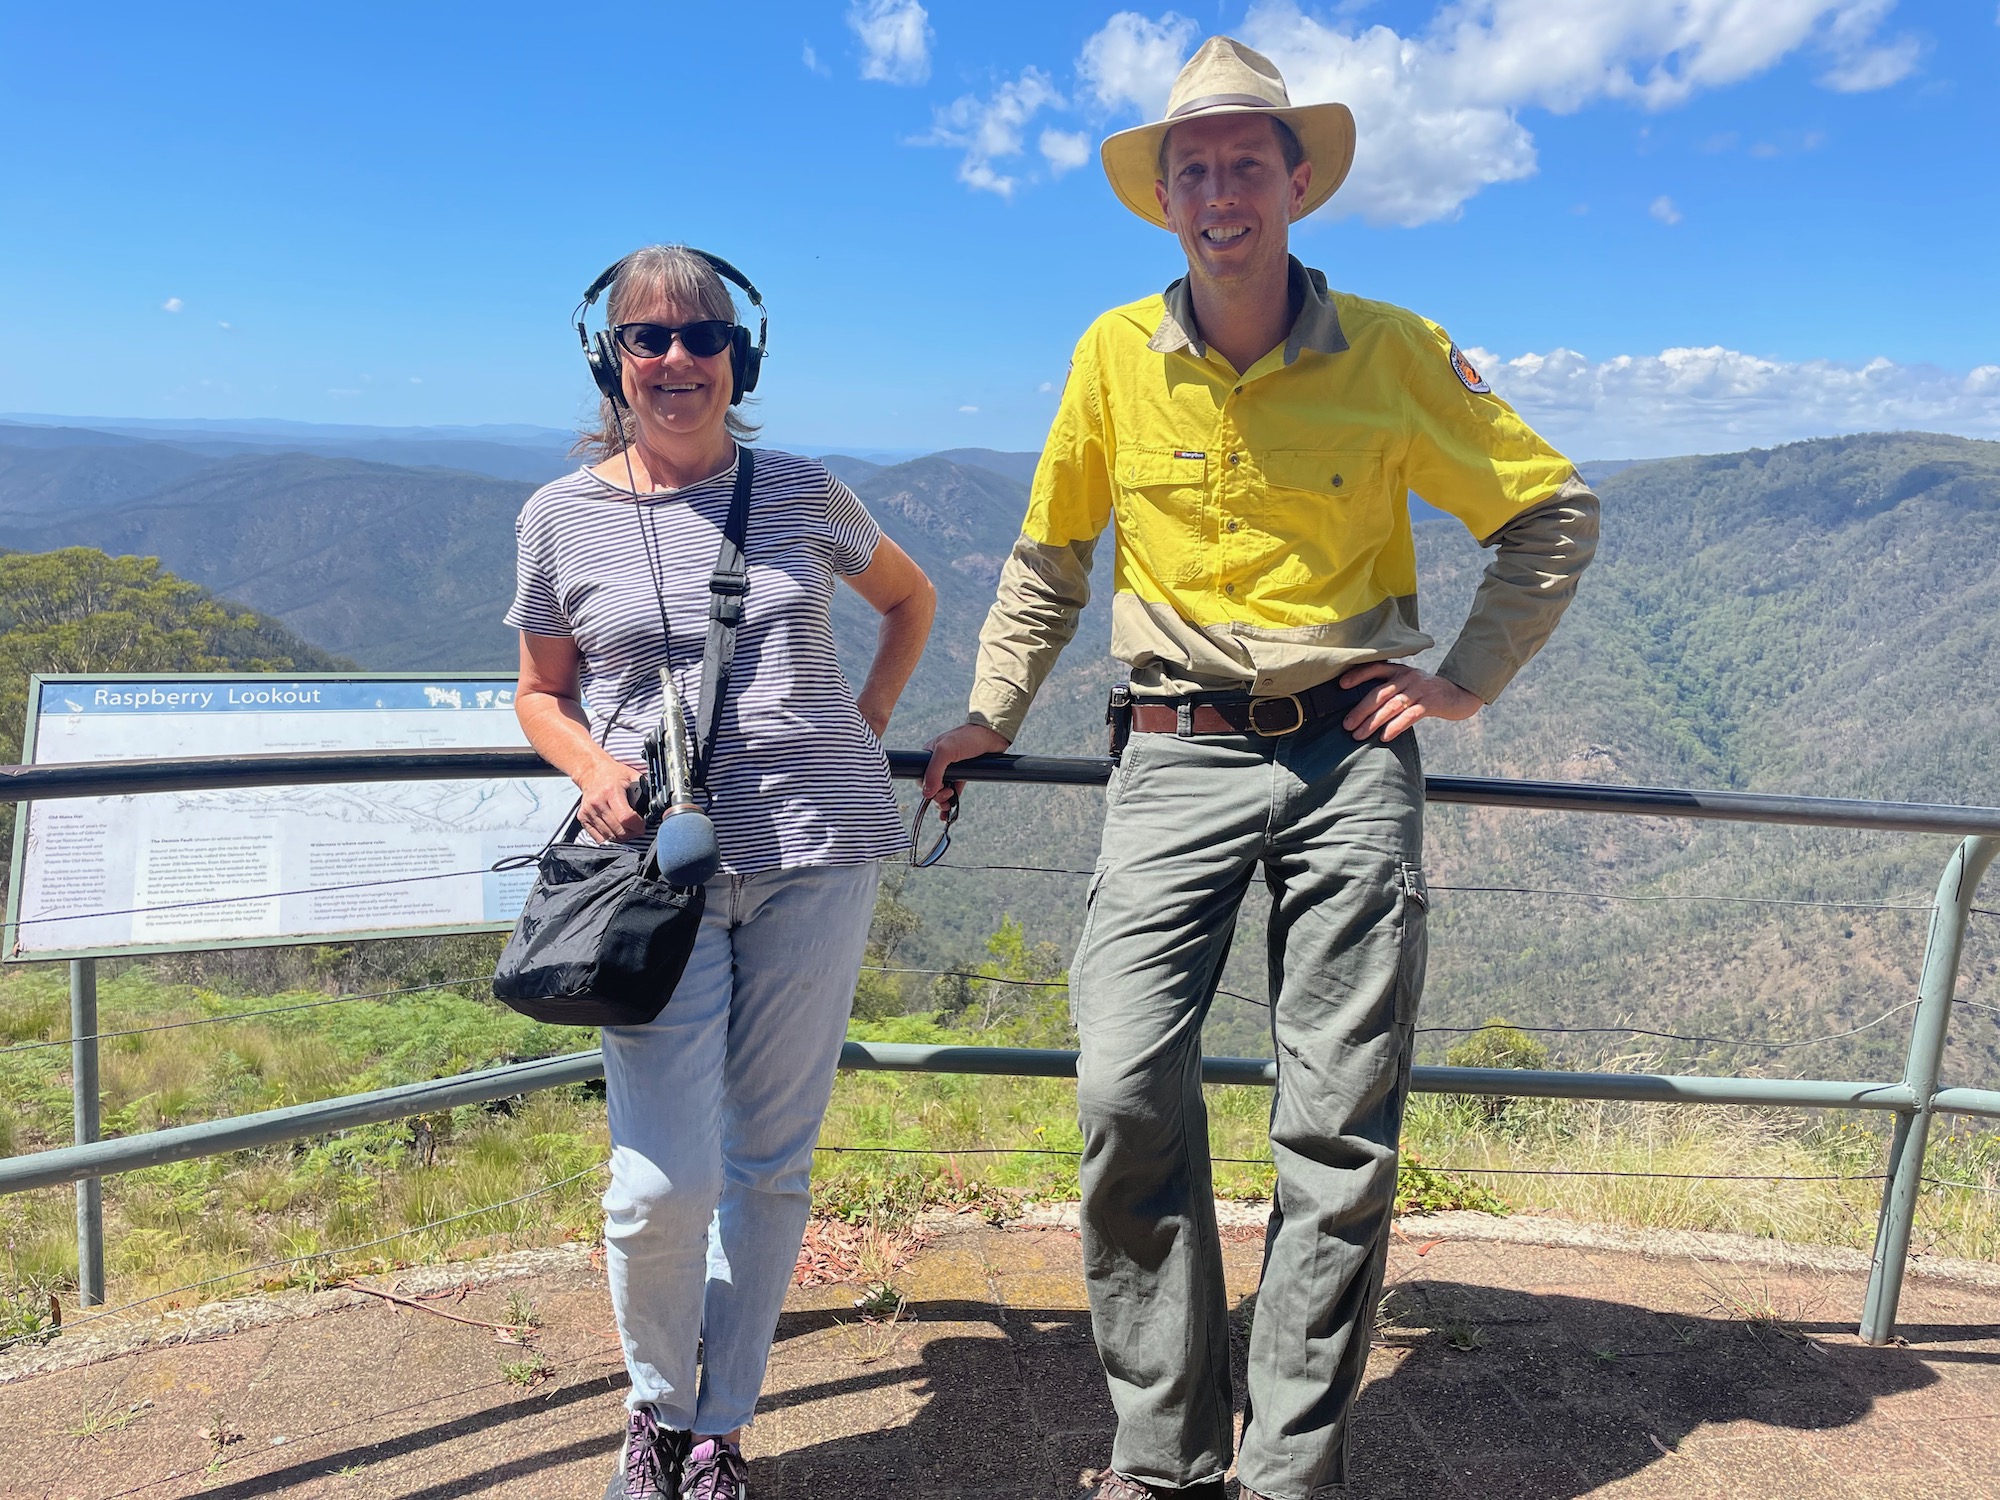 Two people standing on a viewing platform above a magnificent natural mountainous landscape